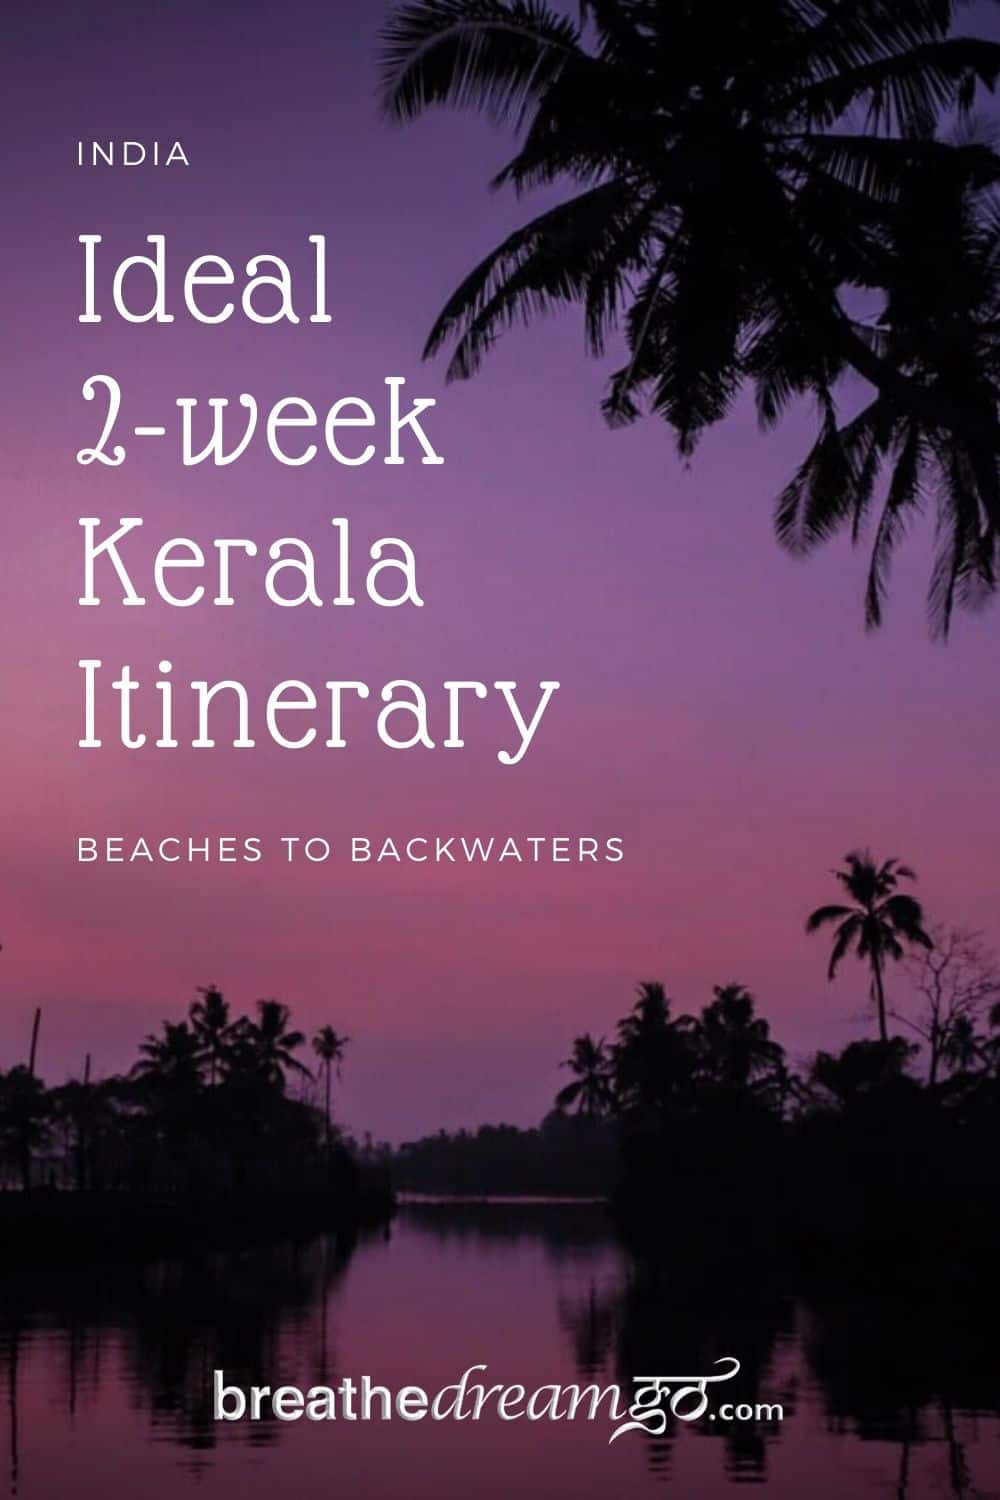 two week Kerala Itinerary includes backwaters